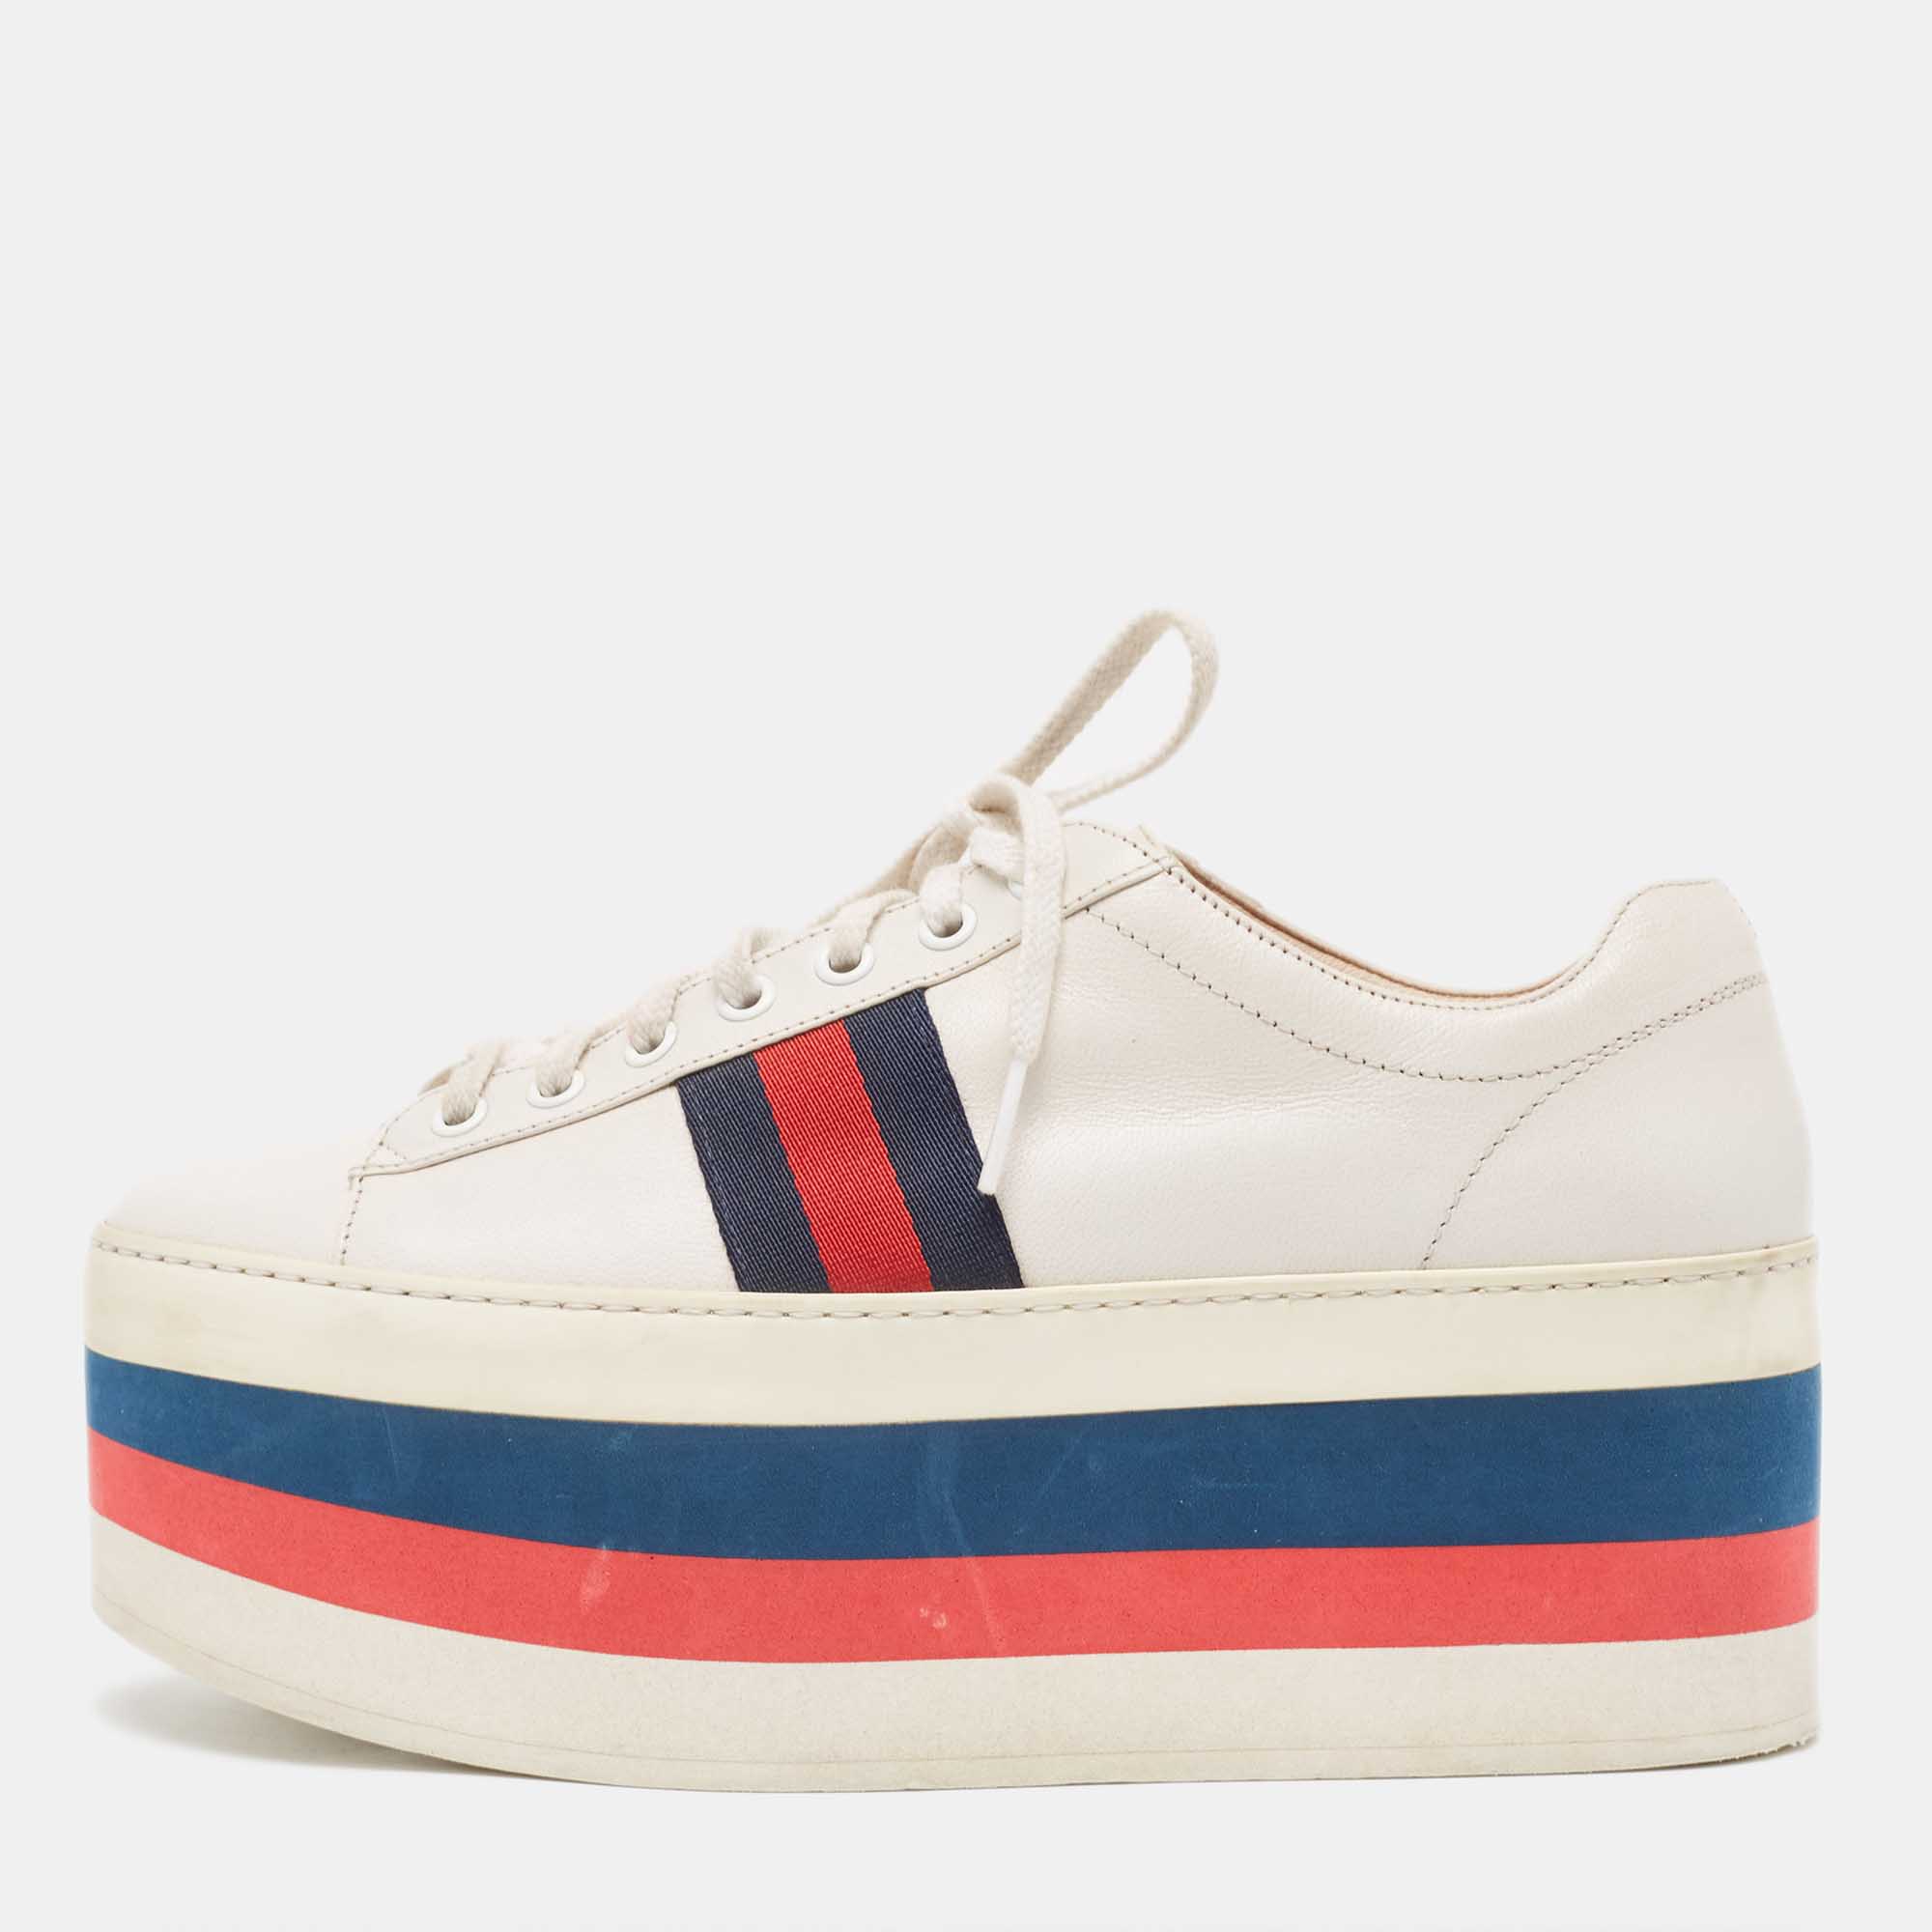 Add a statement appeal to your outfit with these Gucci platform sneakers. Made from premium materials they feature lace up vamps and relaxing footbeds. The rubber sole of this pair aims to provide you with everyday ease.